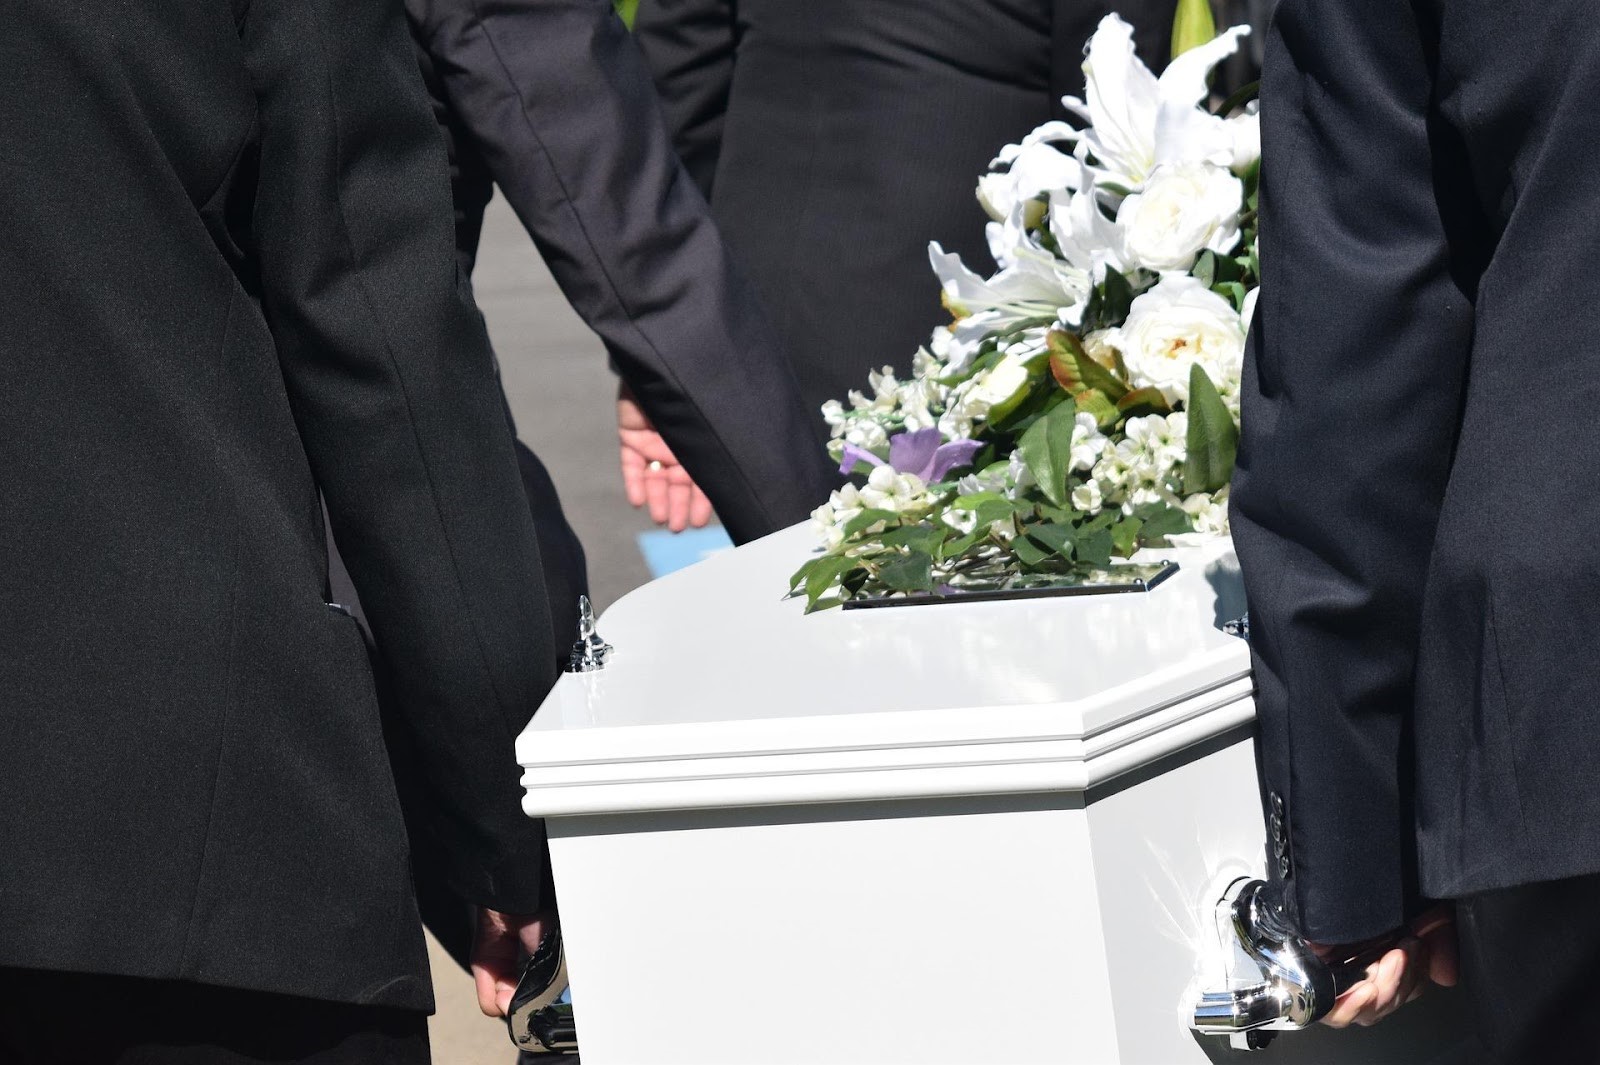 What Is A Wrongful Death Claim - And What Circumstances Might Lead To One?